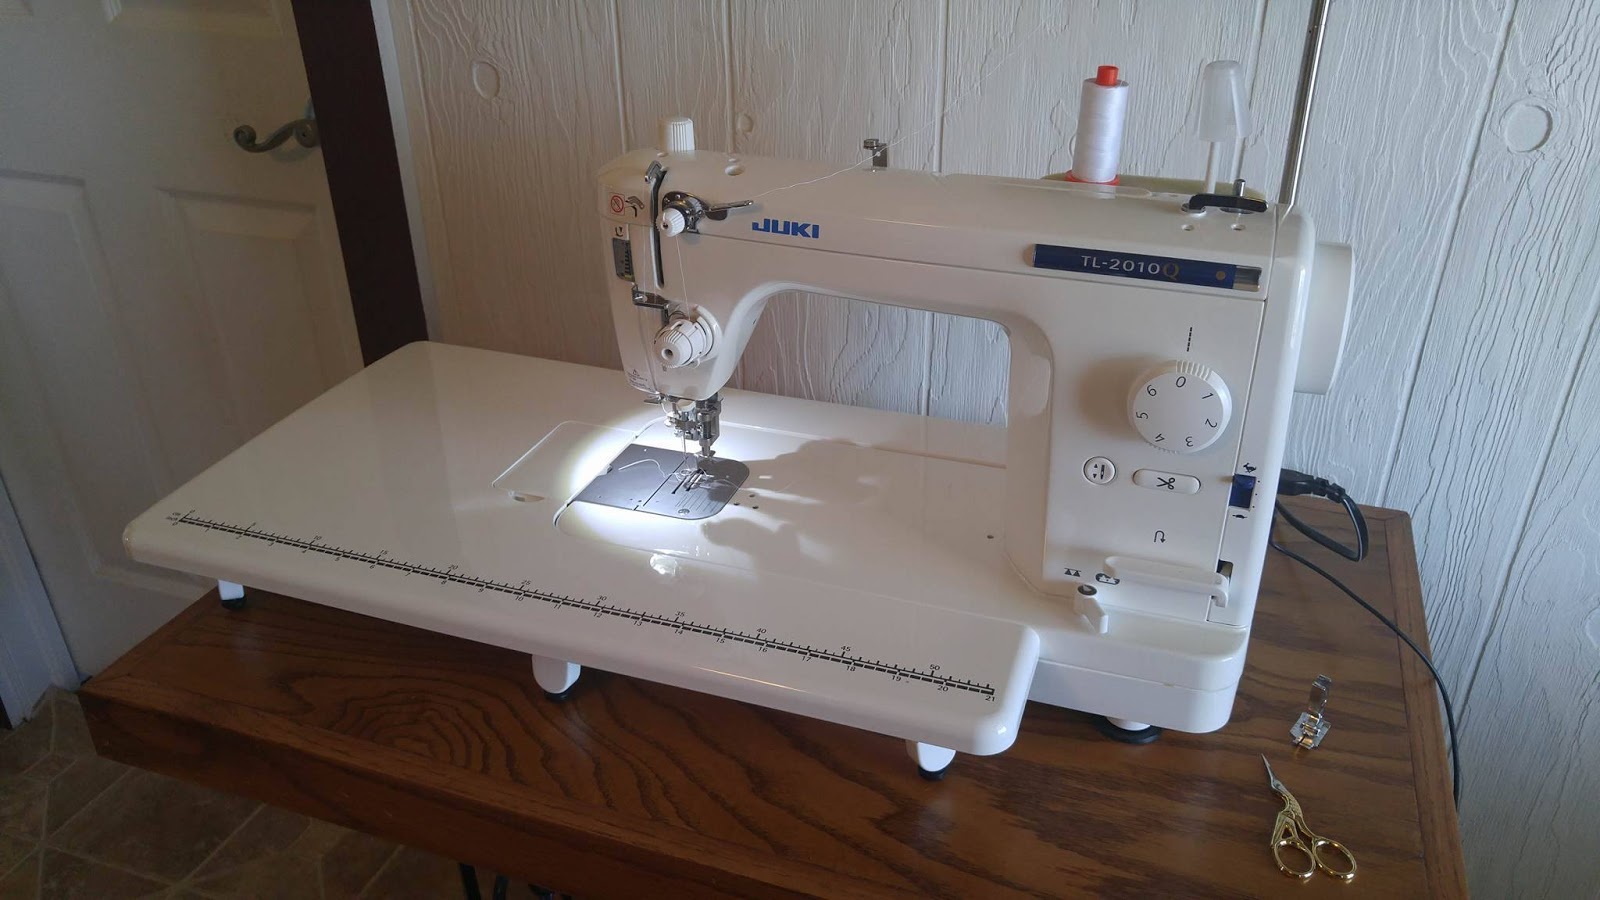 What is the Best Sewing Machine to Buy for Quilting - Meet My Juki TL-2010Q  